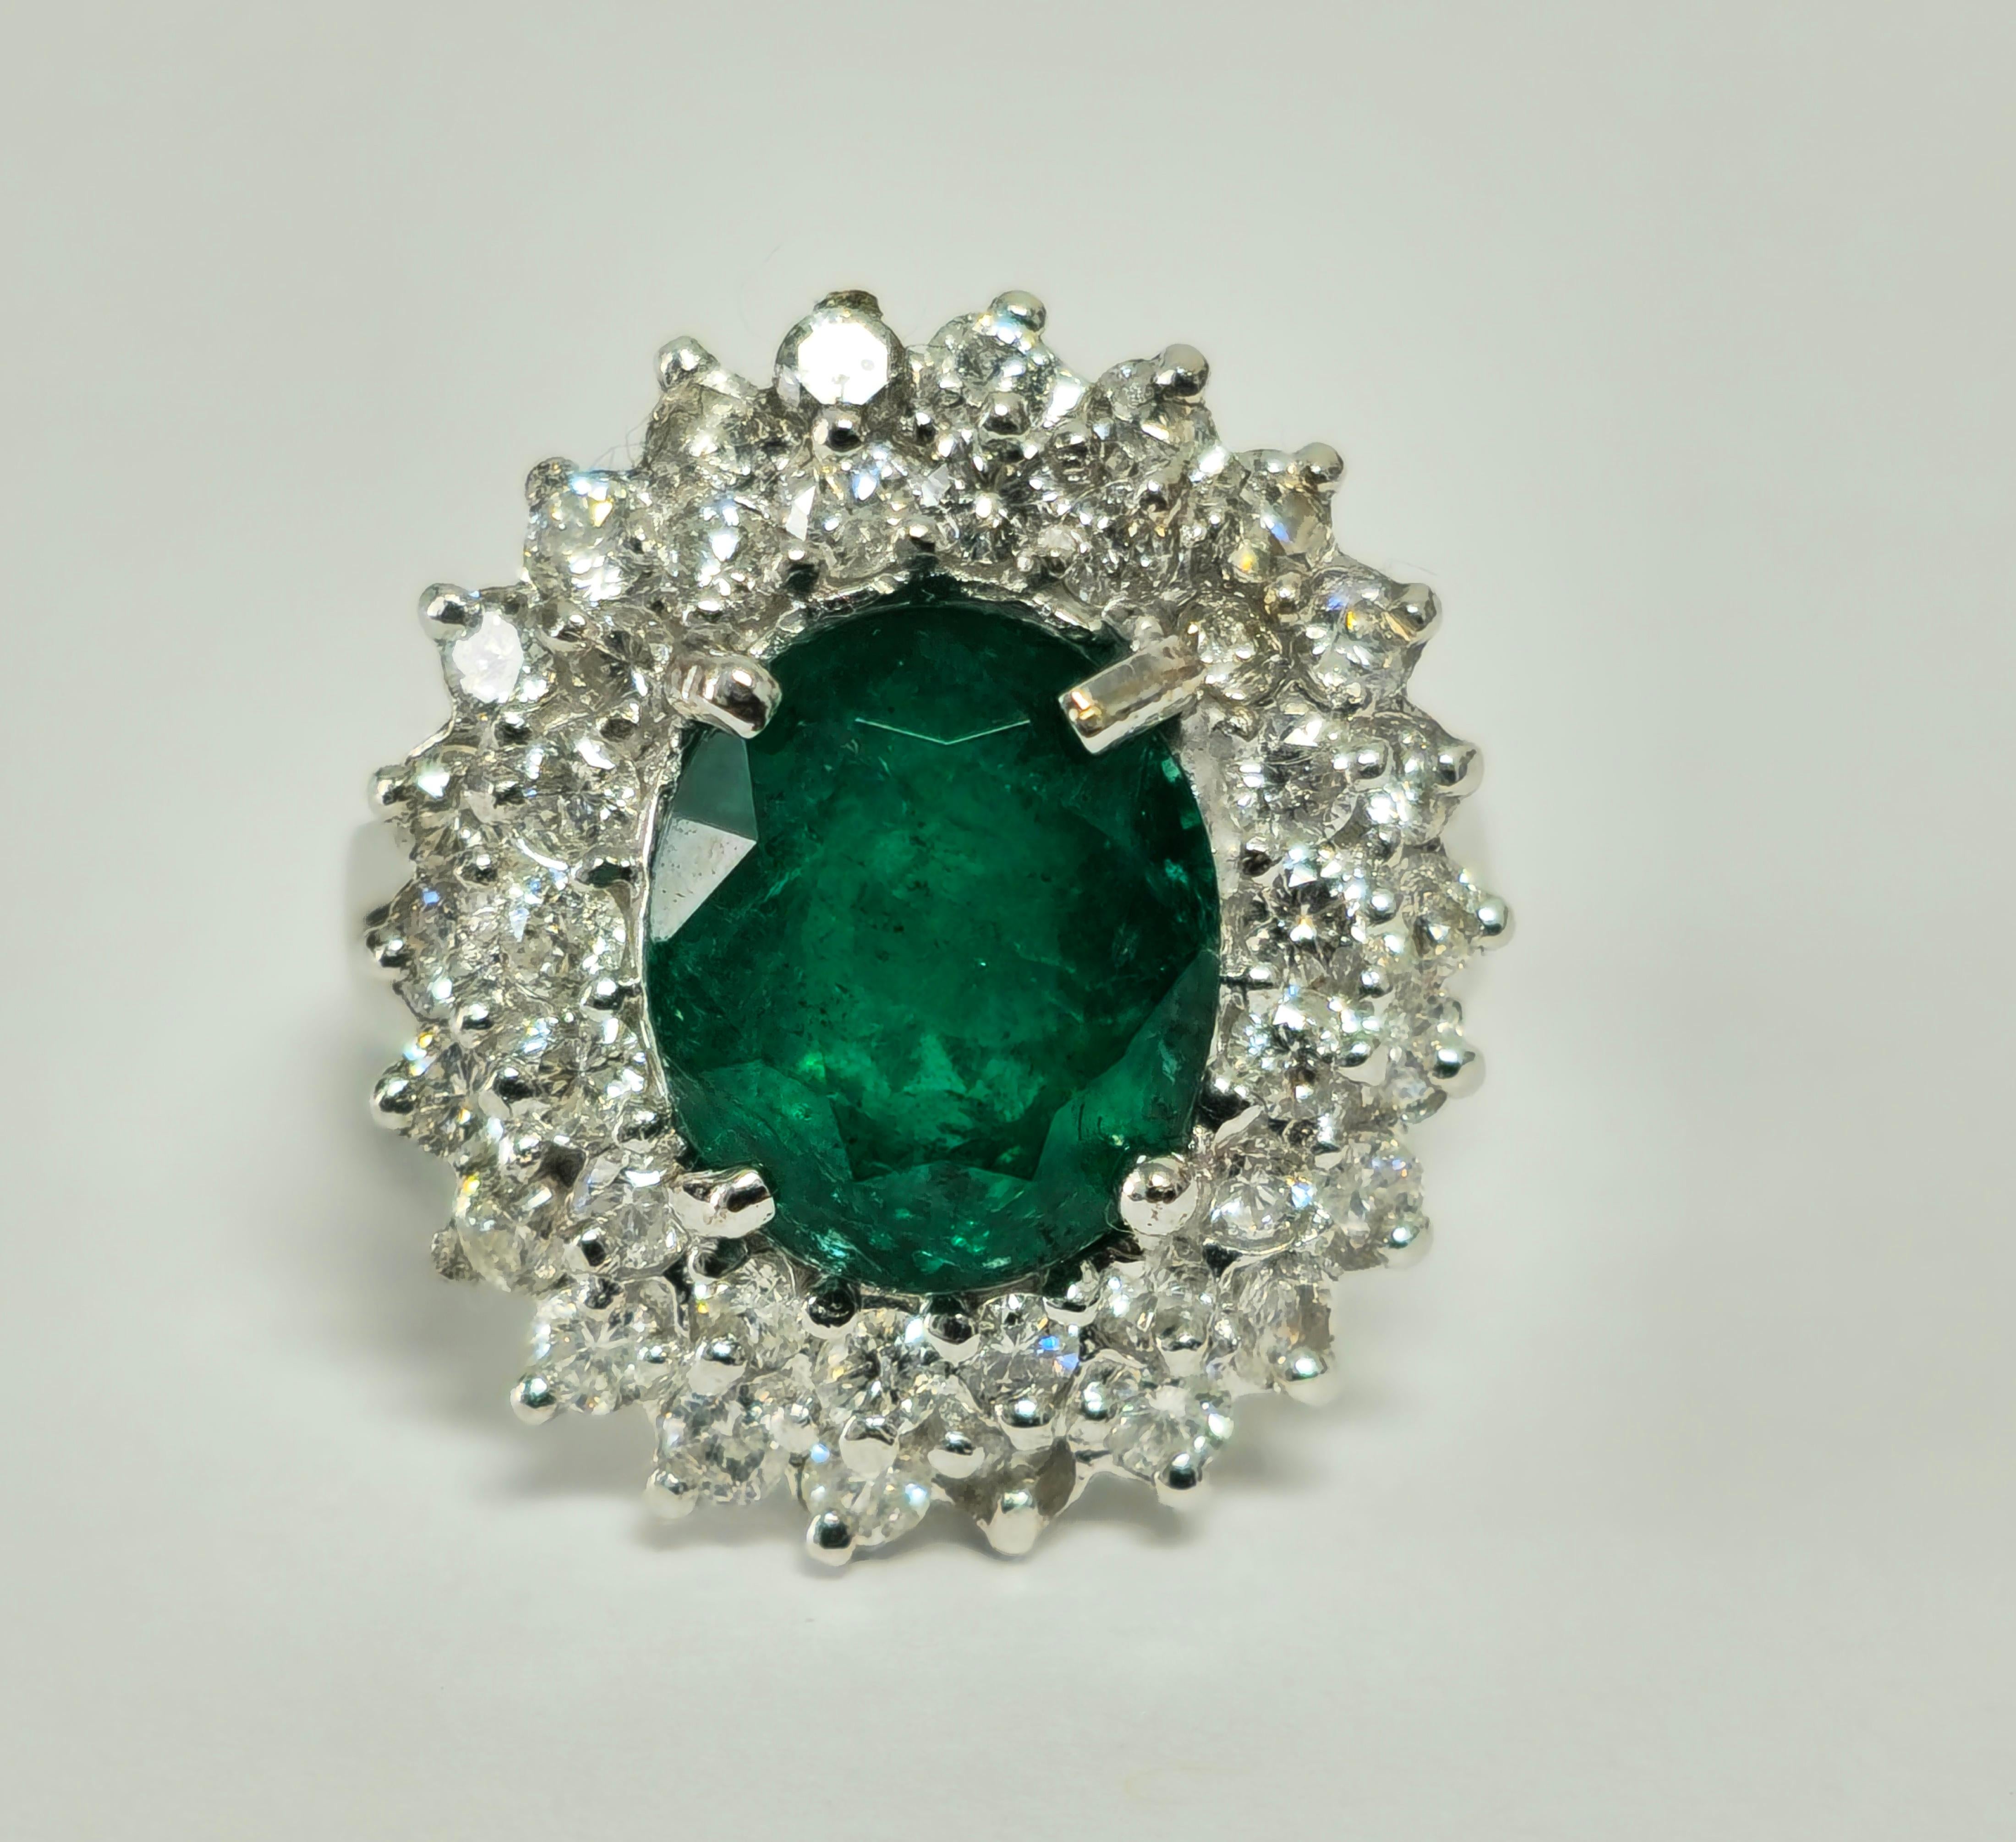 In luxurious 14k white gold, this exquisite cocktail ring features a stunning 3.05 carat oval-shaped emerald, displaying deep color and saturation, securely set in prongs. Encircling the emerald are 1.50 carats of round brilliant cut diamonds,